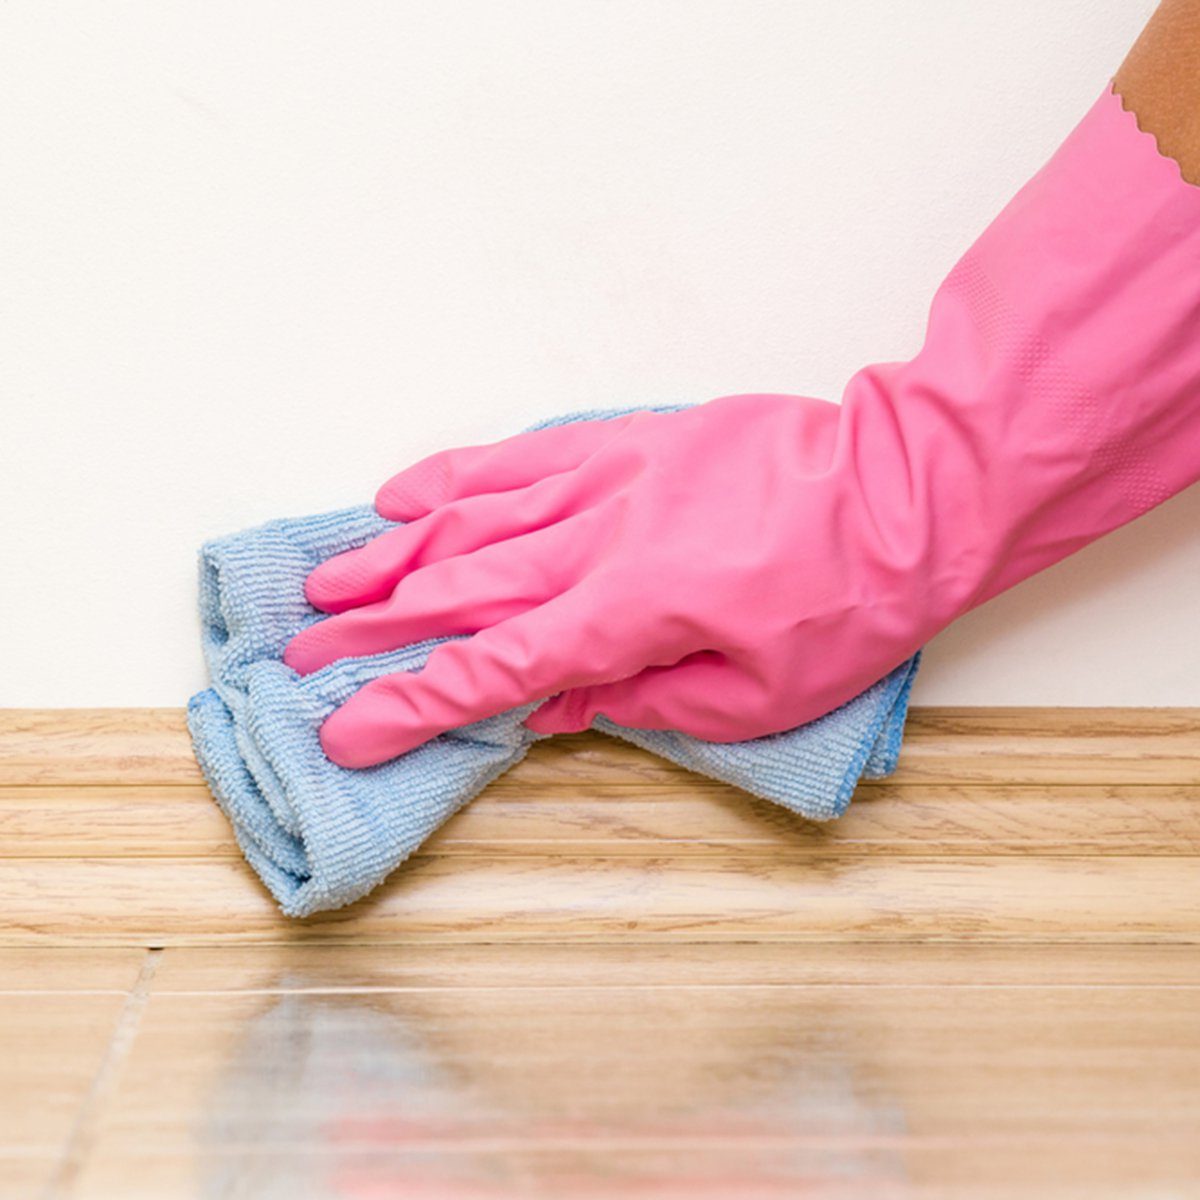 General Flooring Cleaning Tips